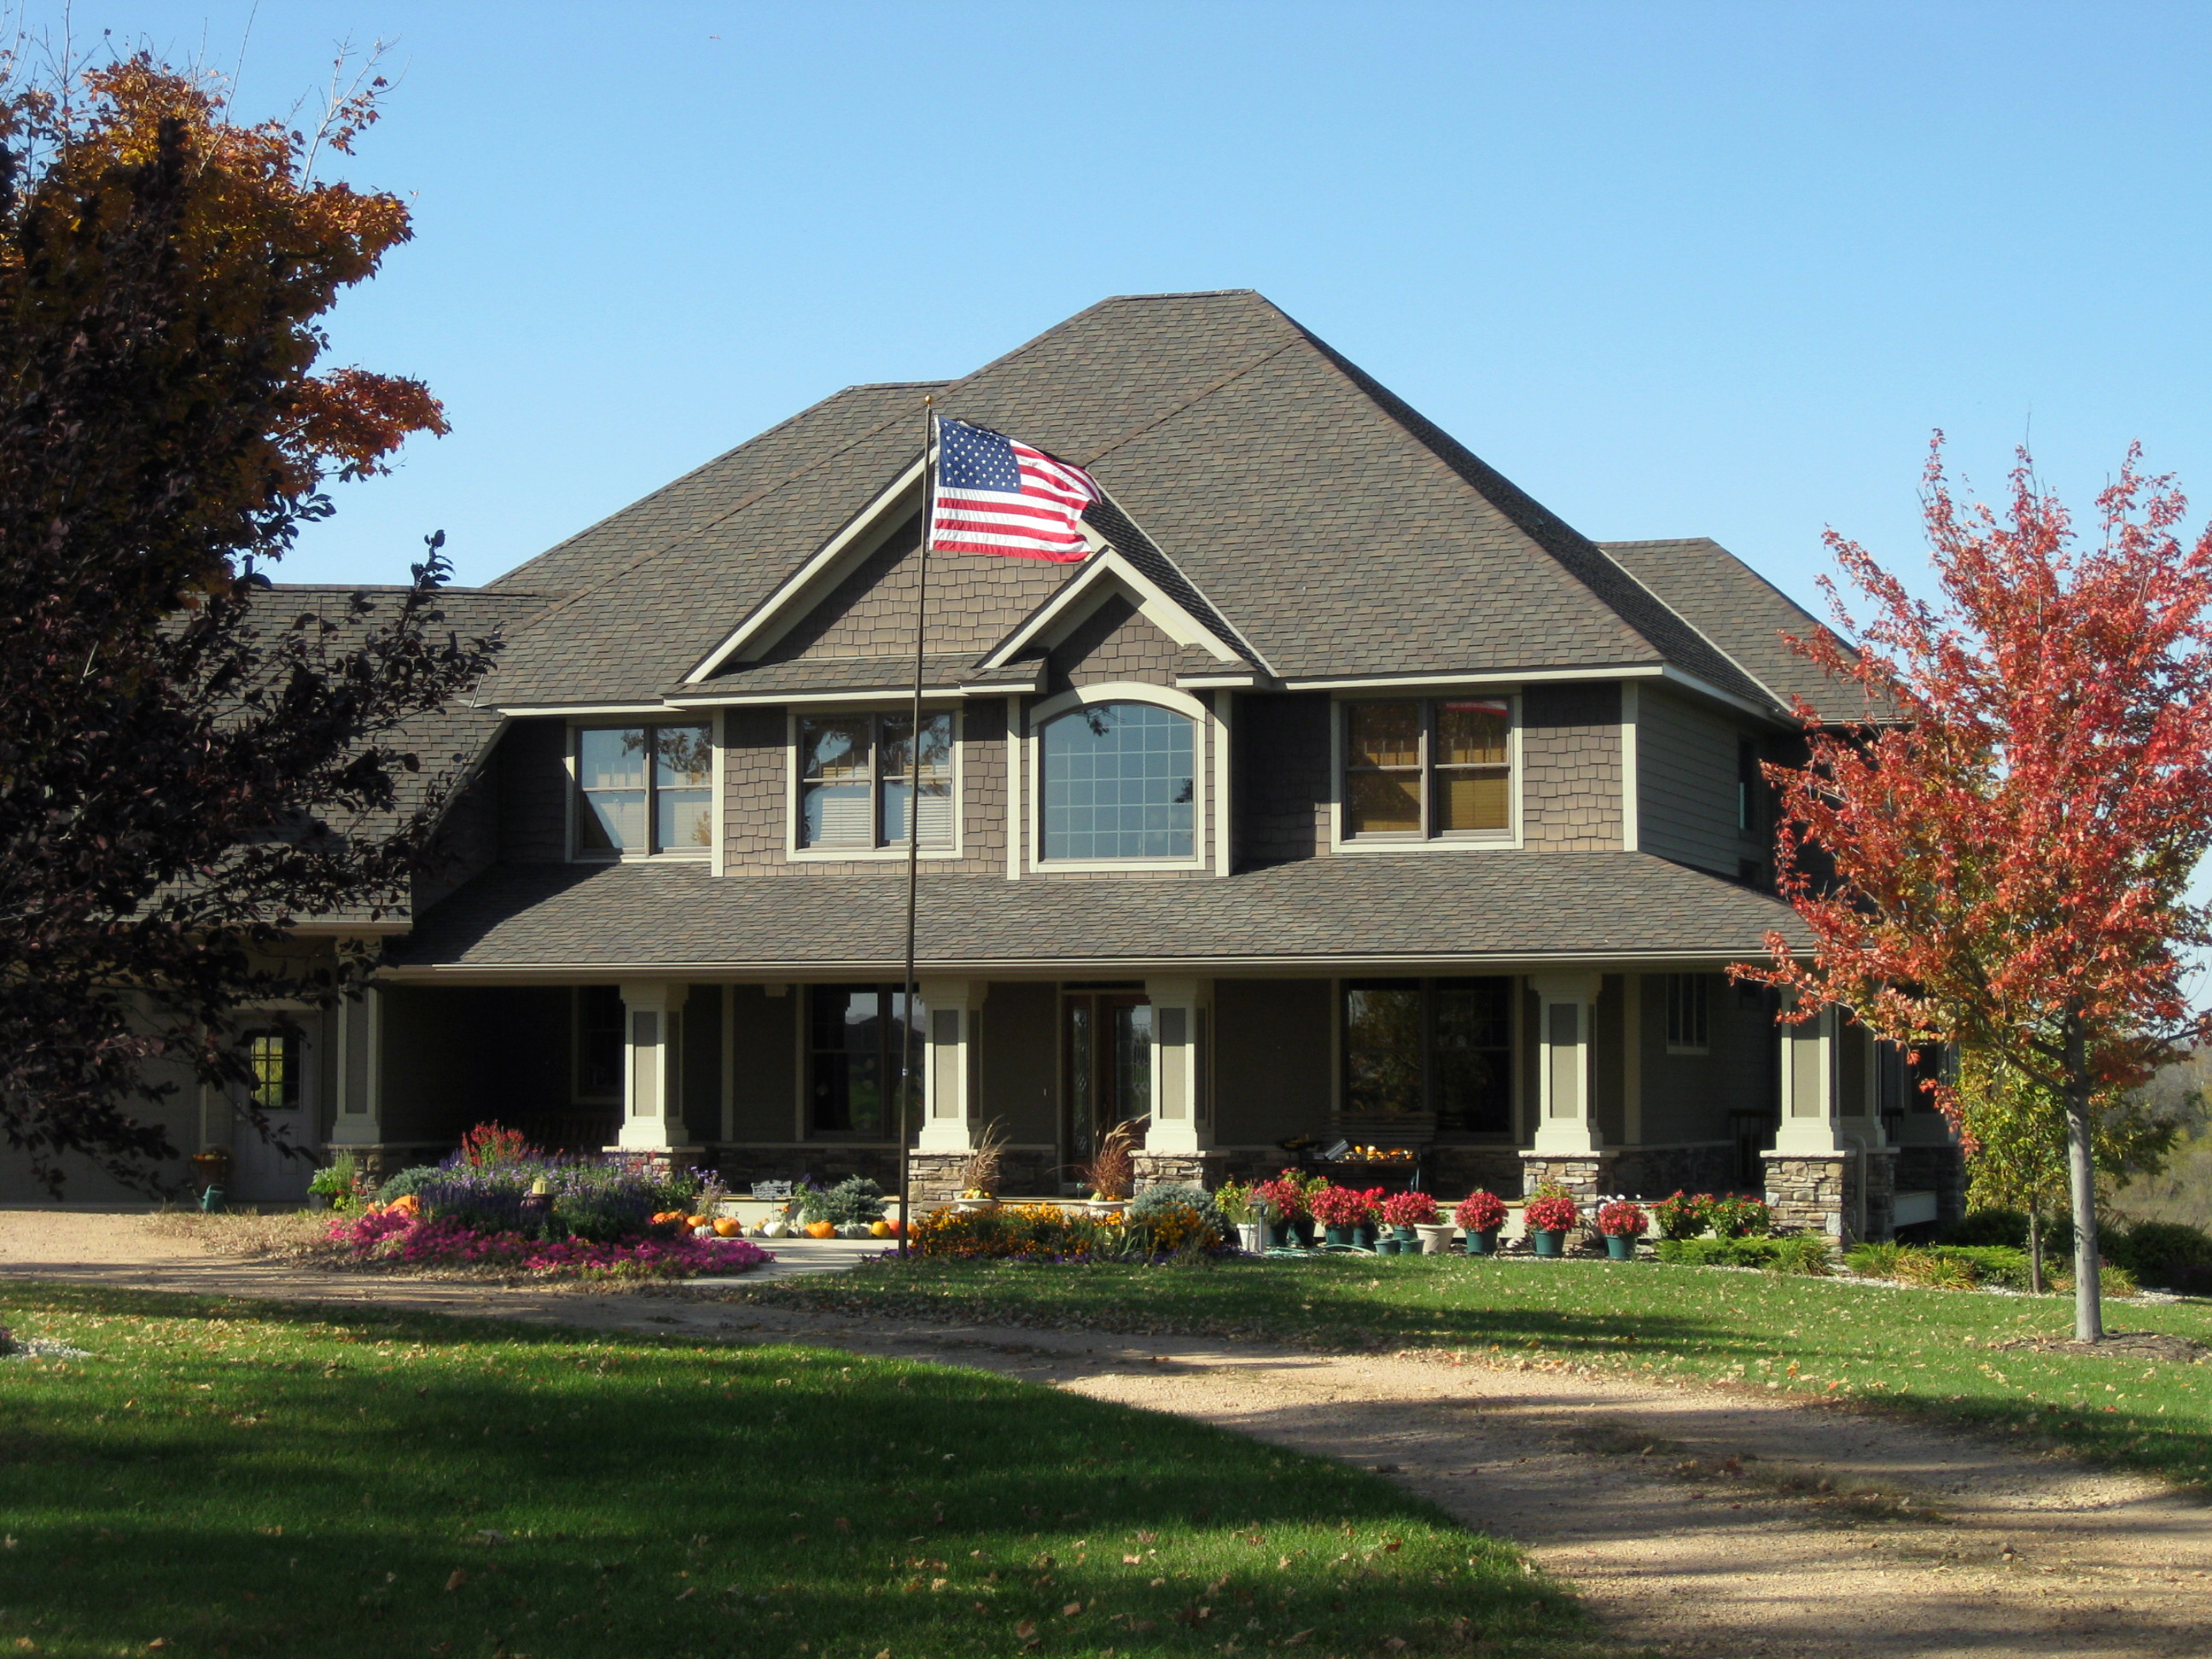 Olive house with front porch and American flag